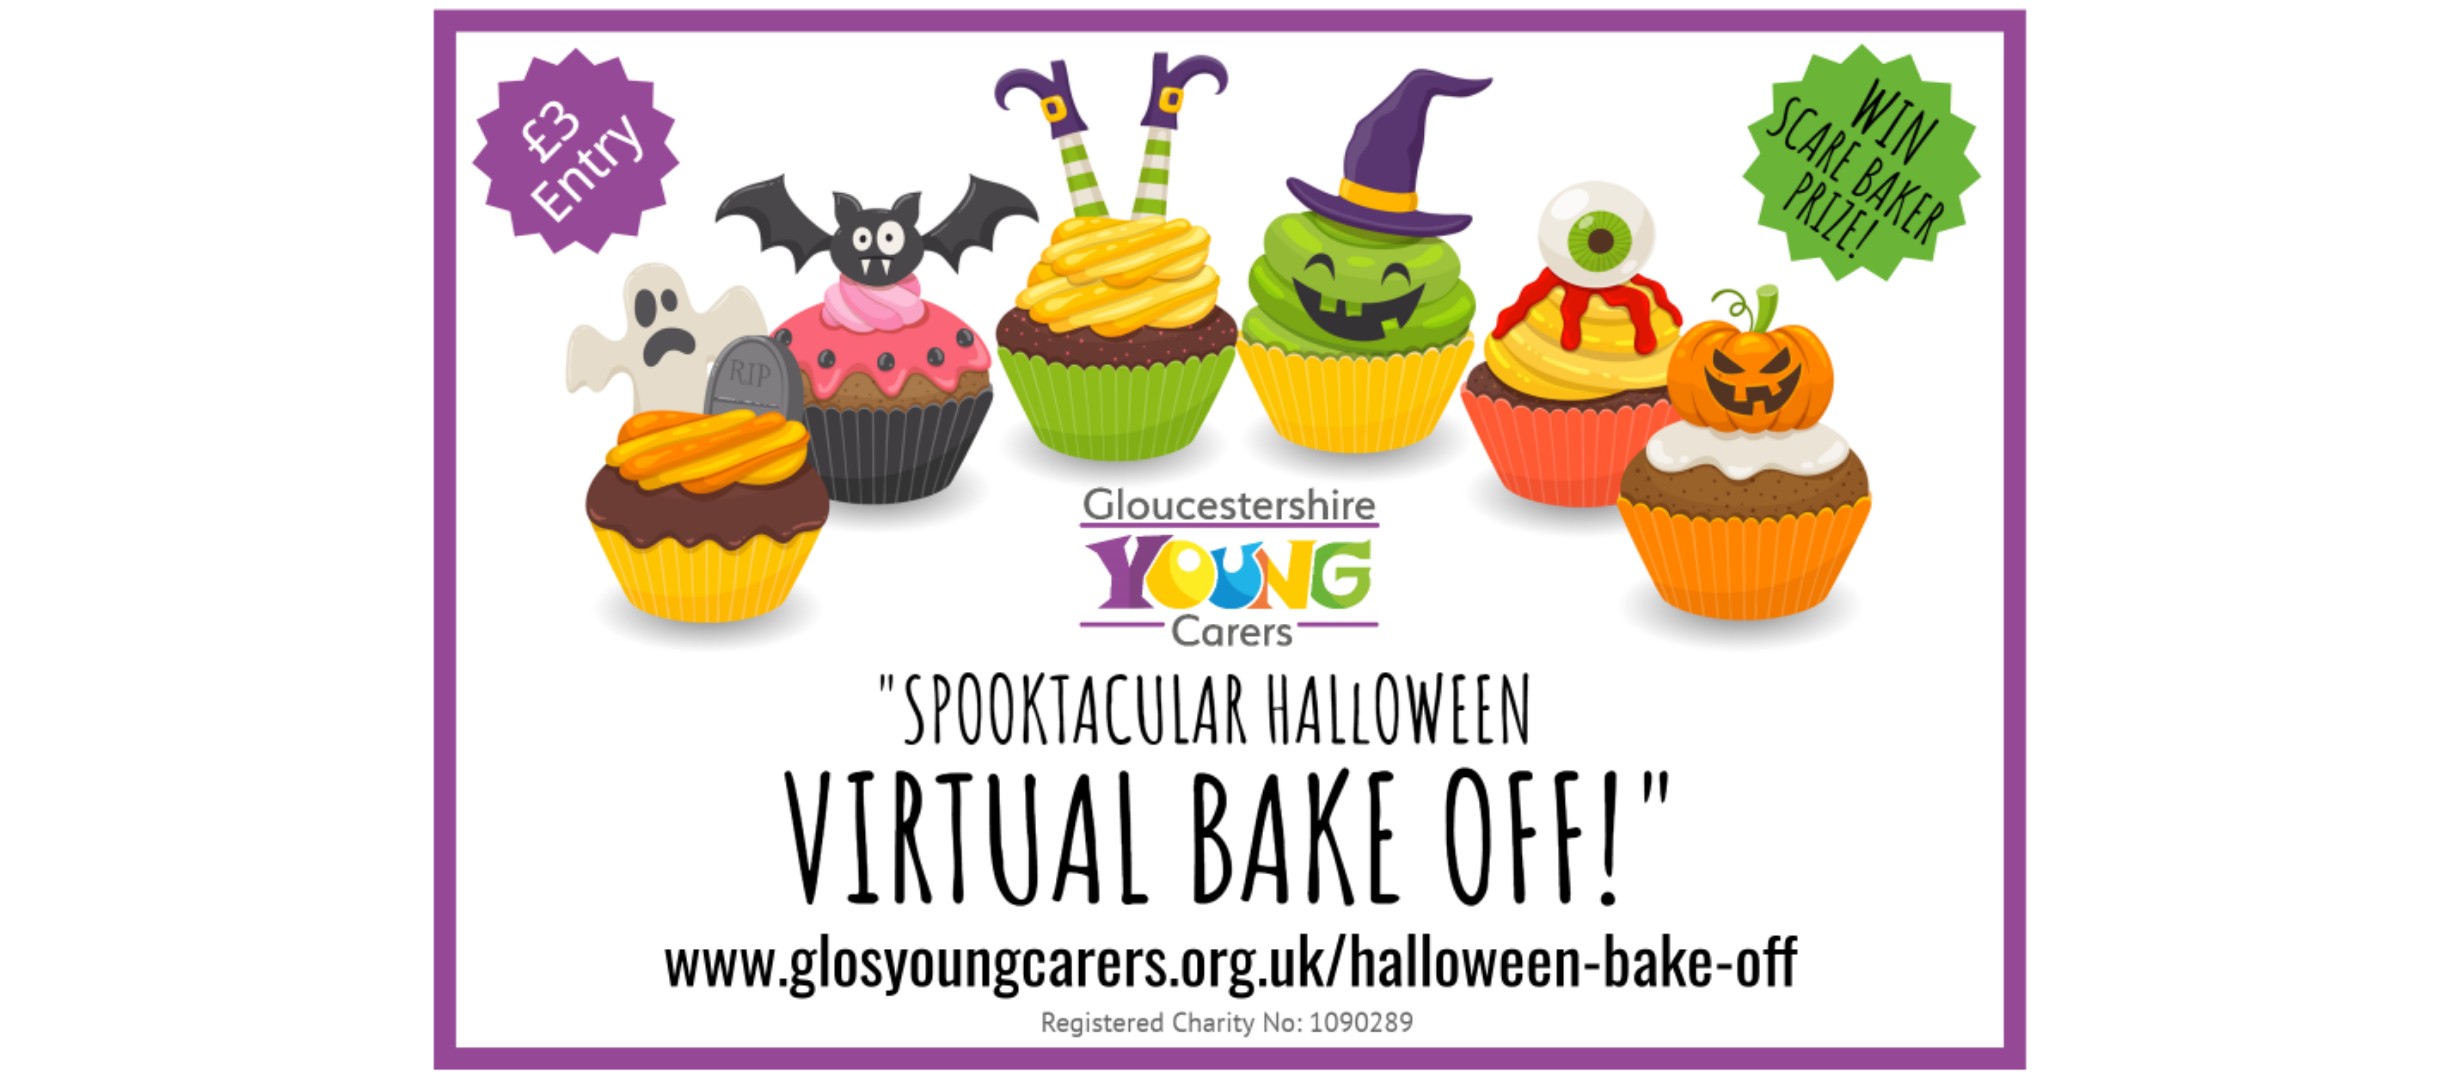 cupcakes, glos young carers logo, text reads 'spooktakular virtual bake-off! www.glosyoungcarers.org.uk/halloween-bake-off'